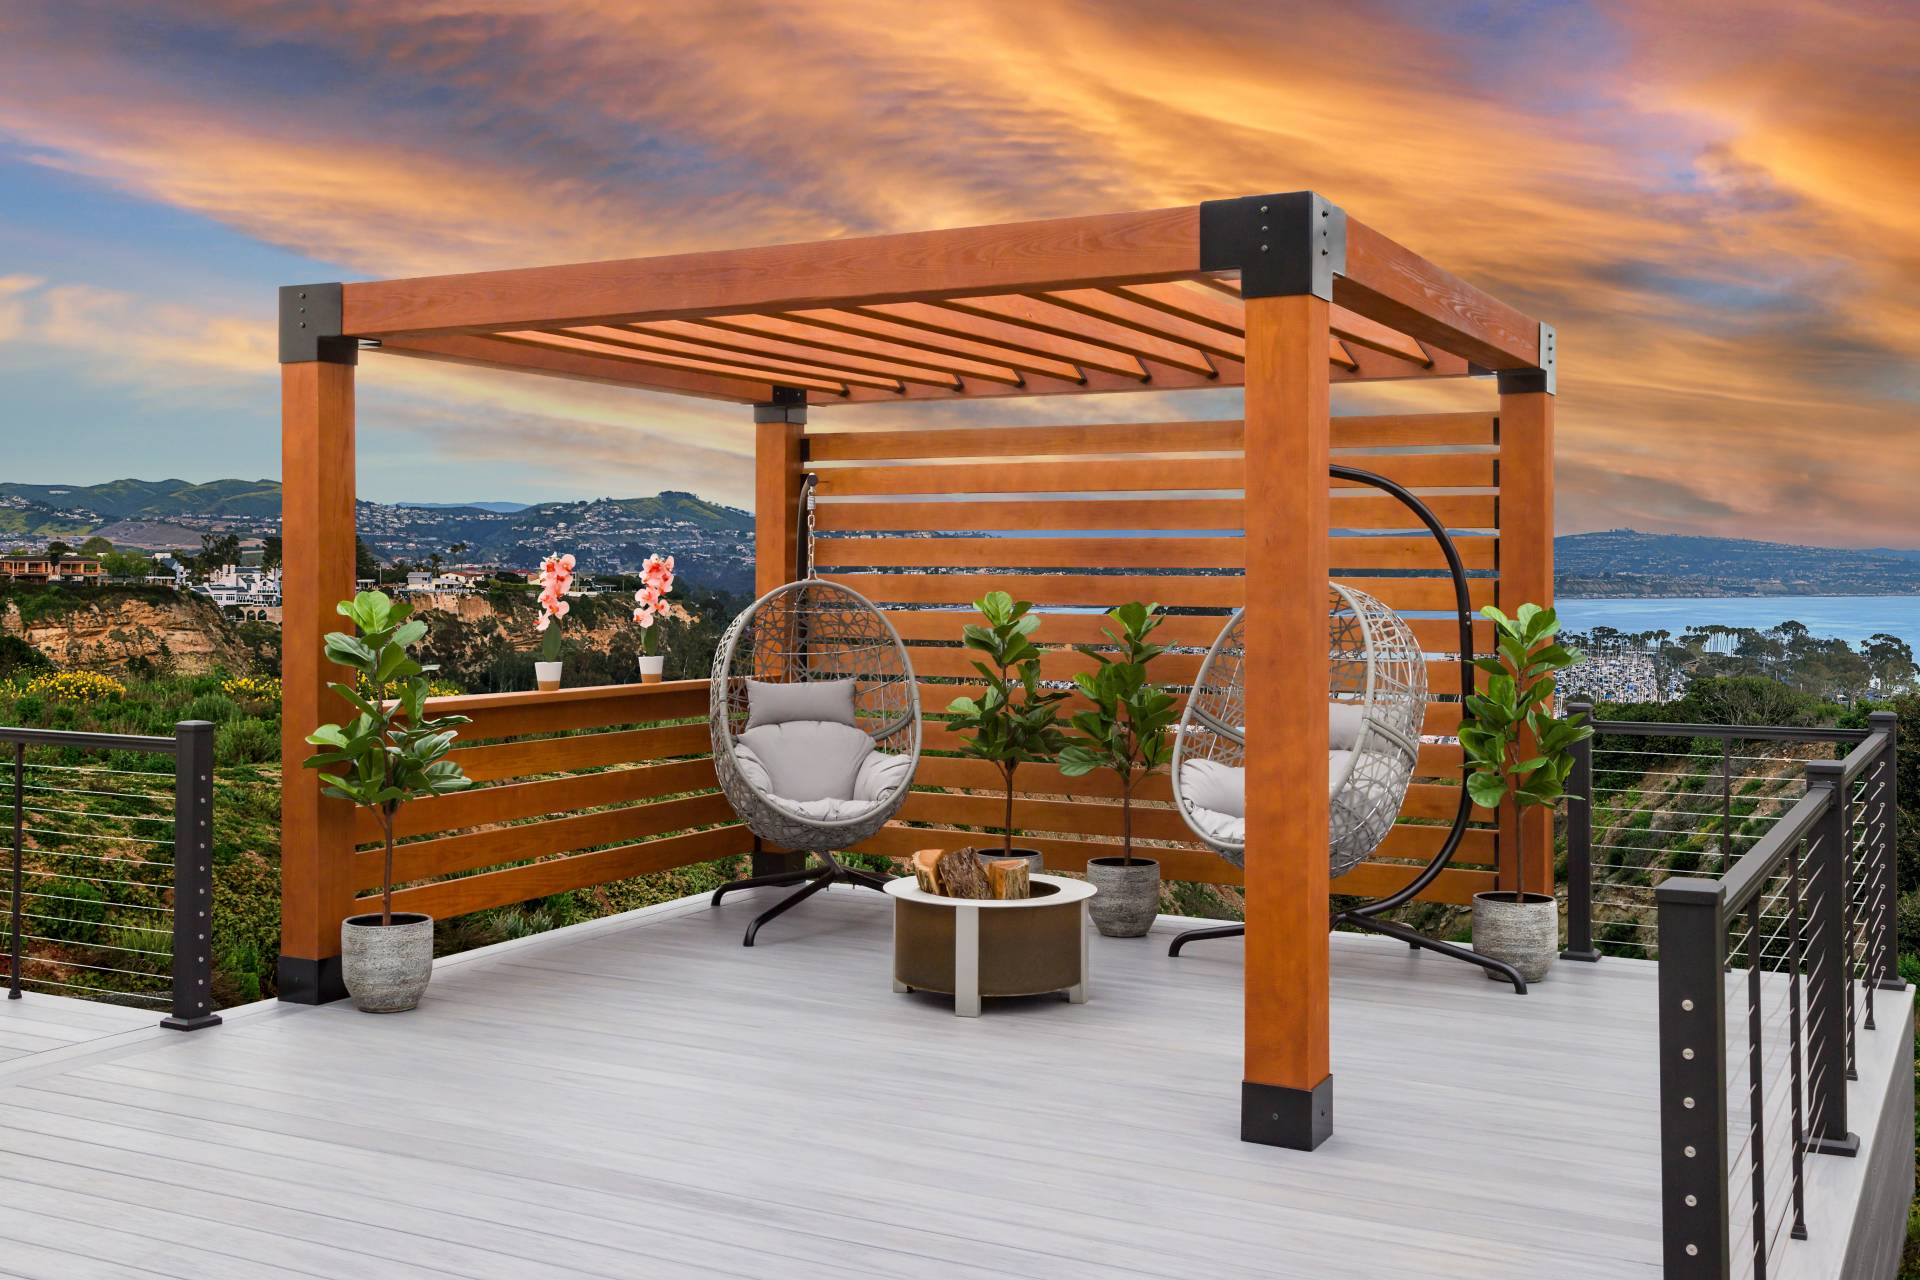 How Can a Pergola Add Value to Your Home?